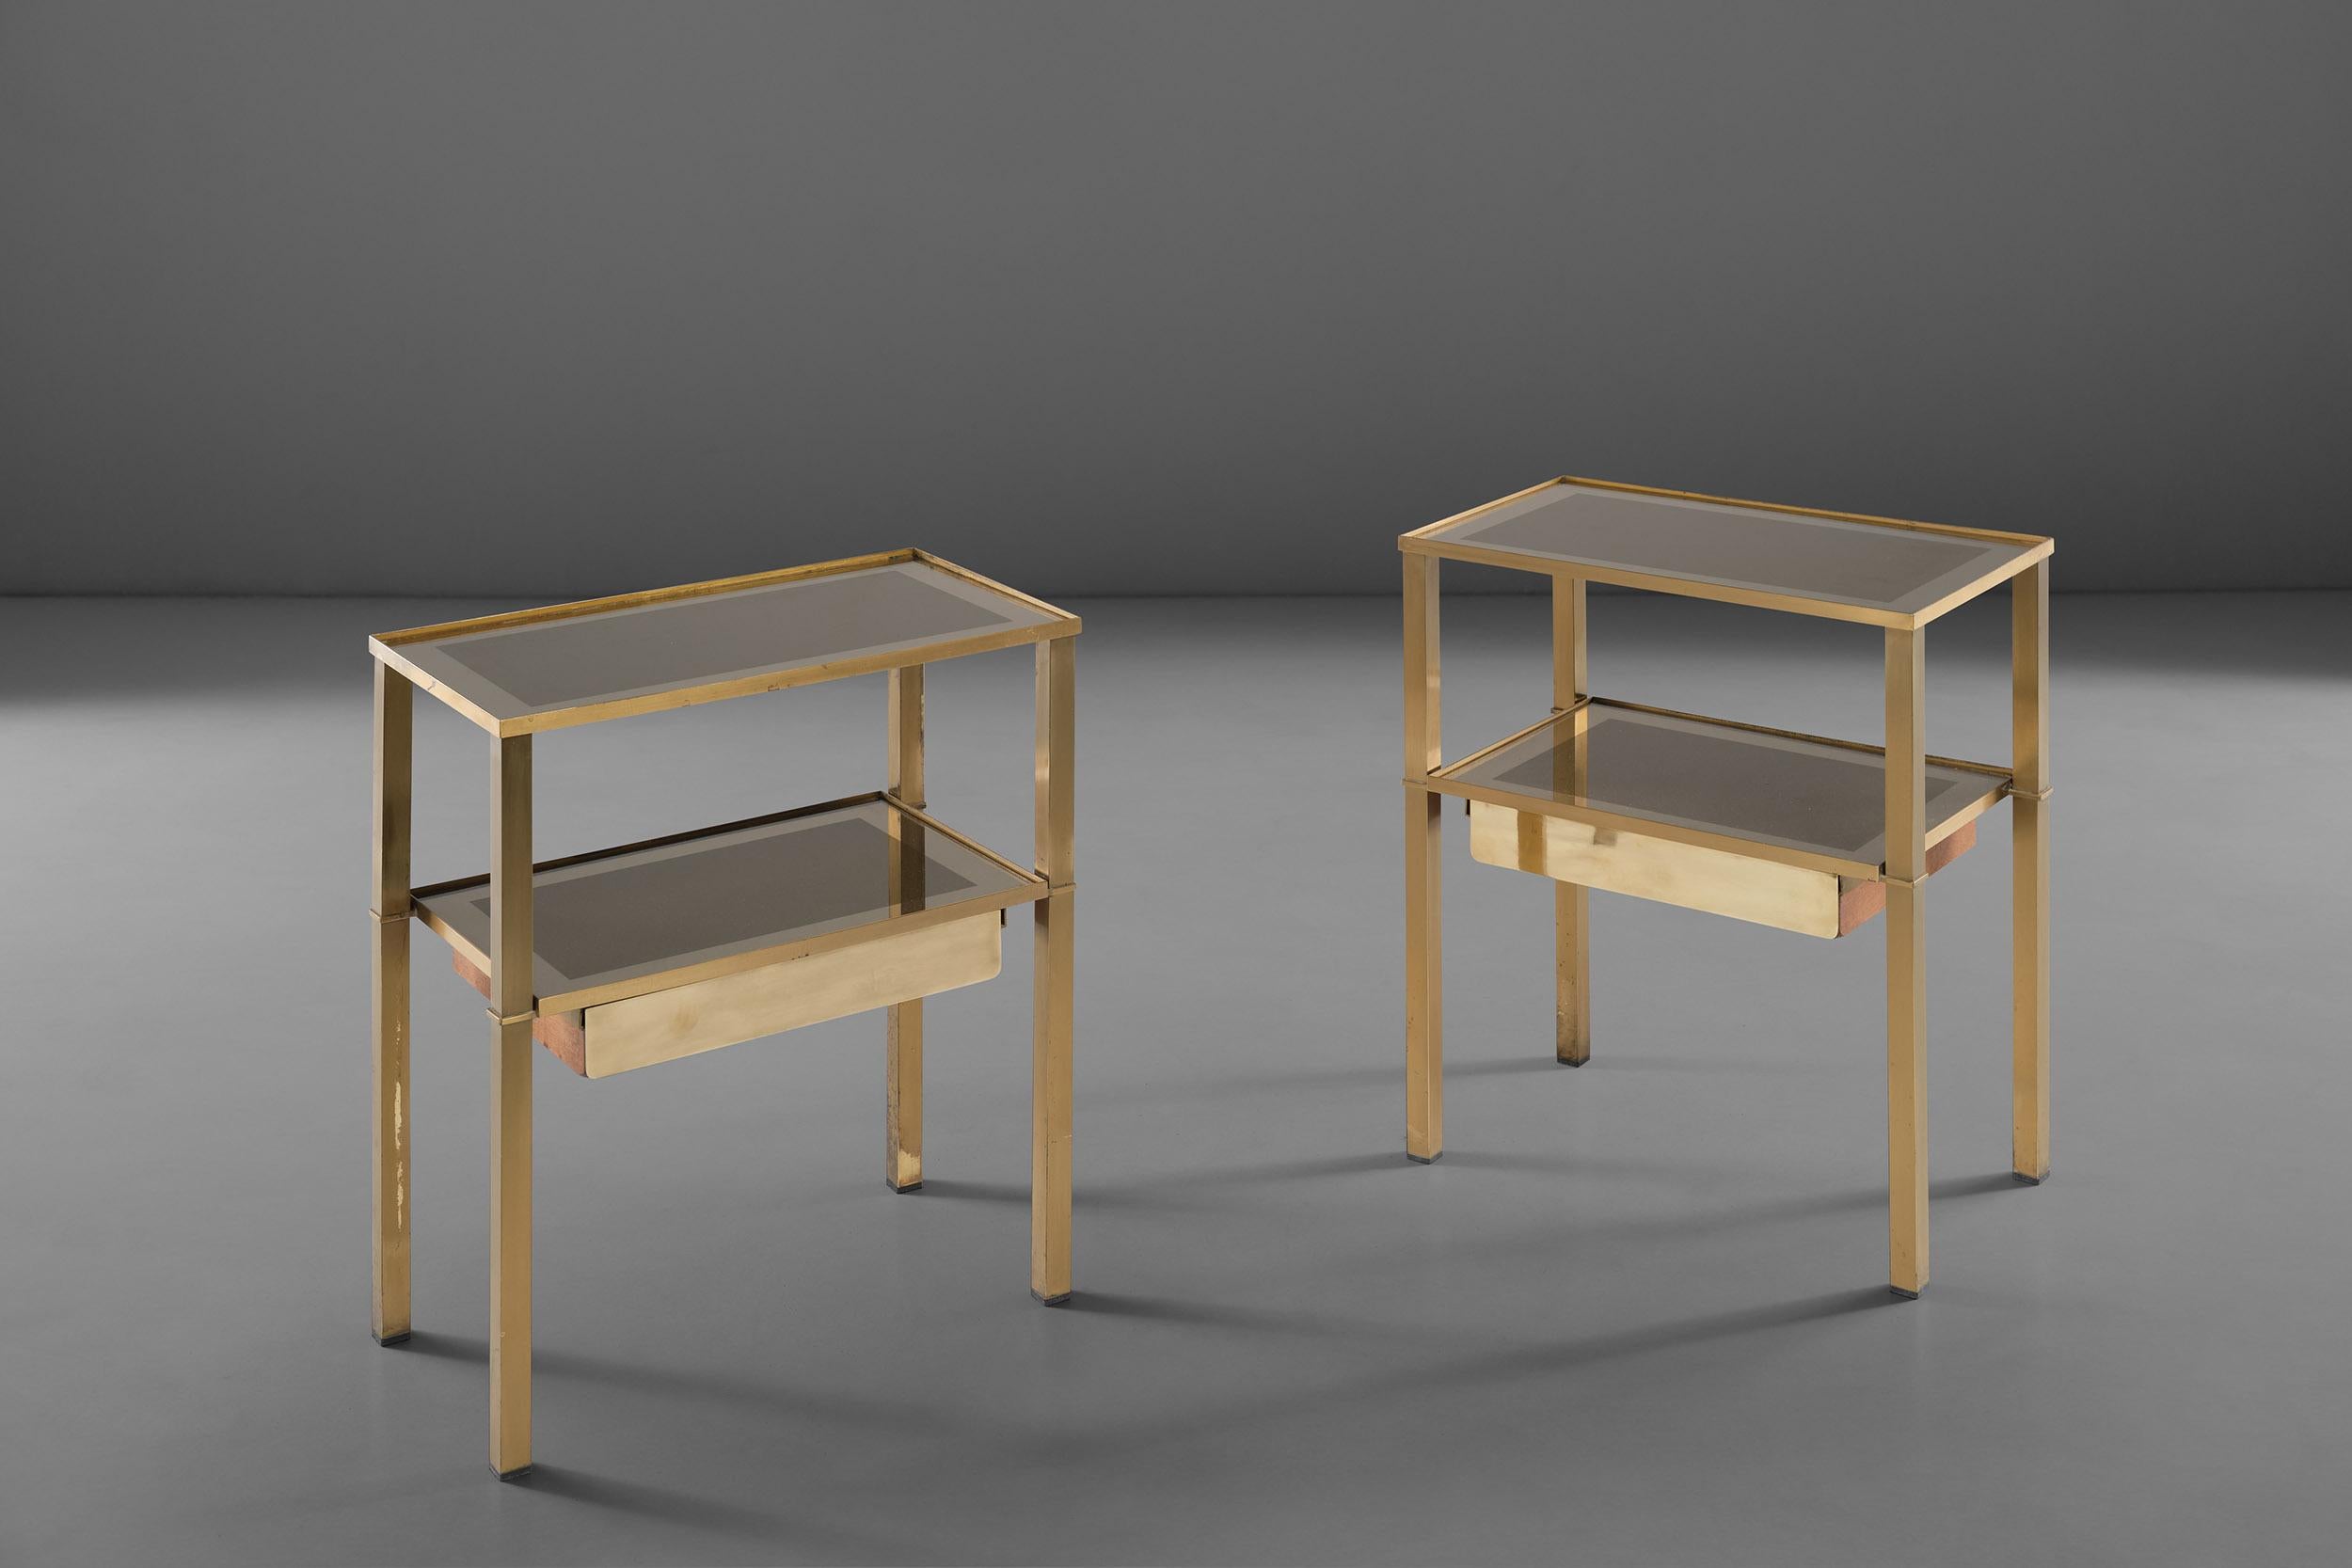 This iconic night table was designed by Romeo Rega in the 70s.
Like most of Rega's production, this clean-lined modernist piece is characterized by a two-level geometric shape, made seductively unique by brass and mirrored glass, which adds the